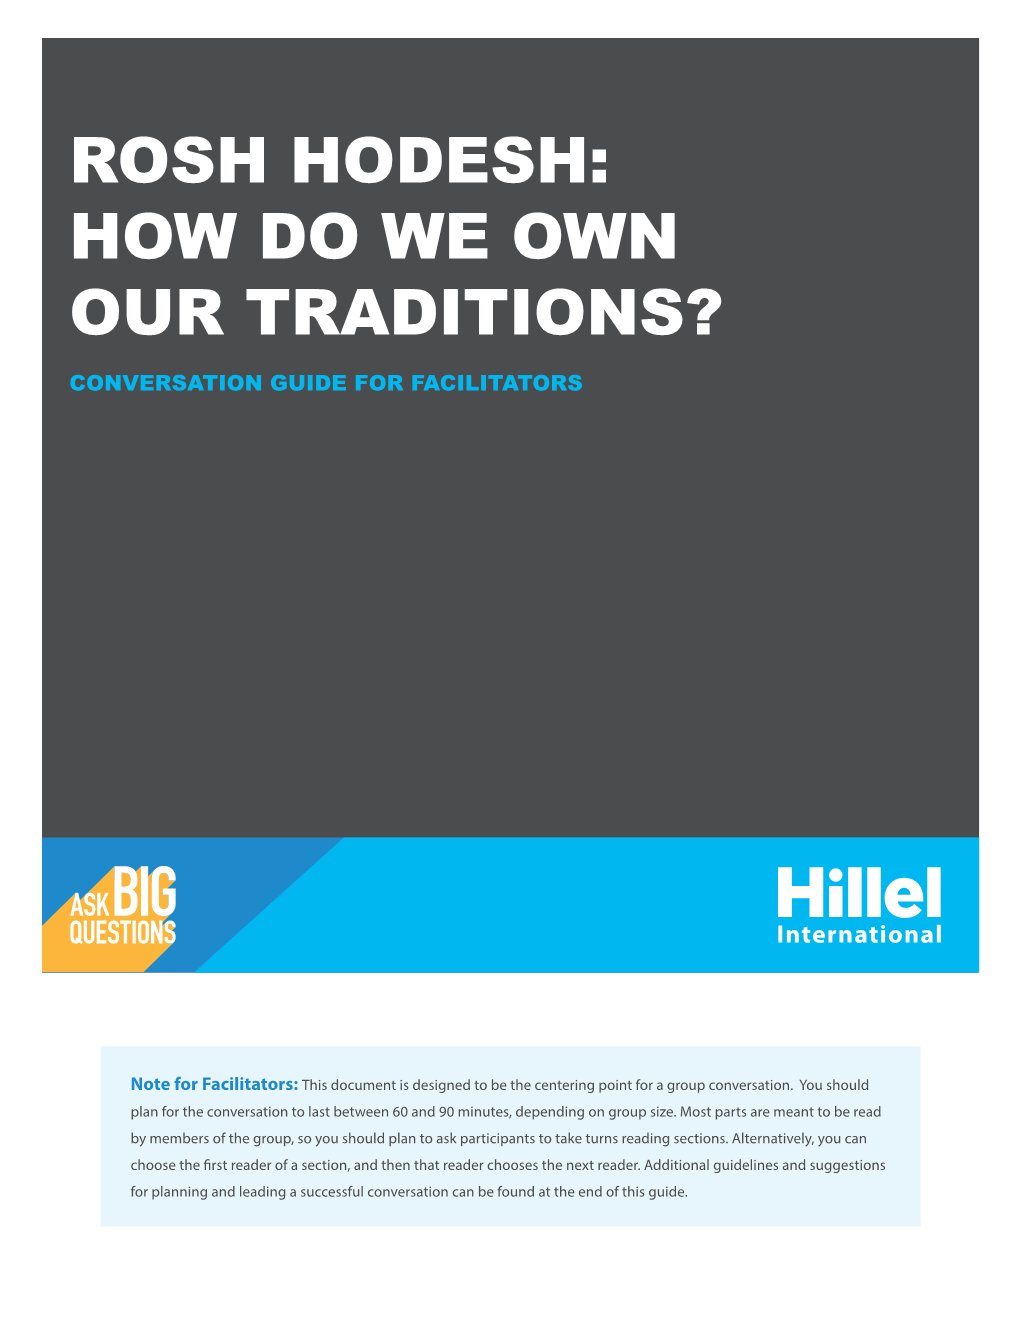 How Do We Own Our Traditions? Conversation Guide for Facilitators